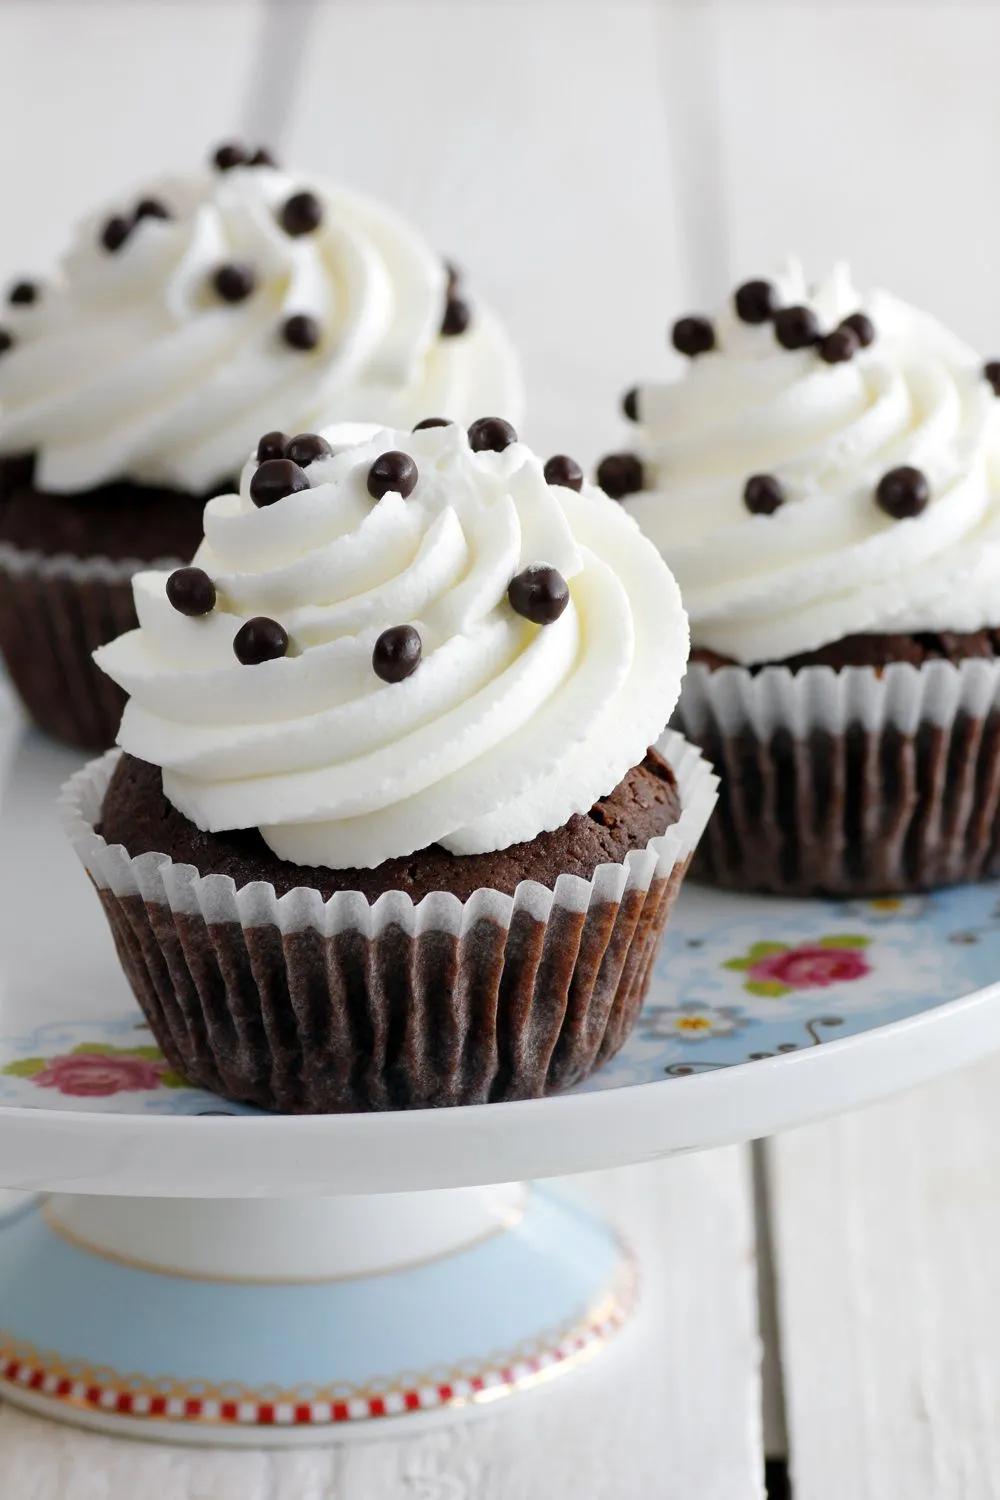 Chocolate Cupcakes with Whipped Cream Frosting Healthy Cake Recipes ...